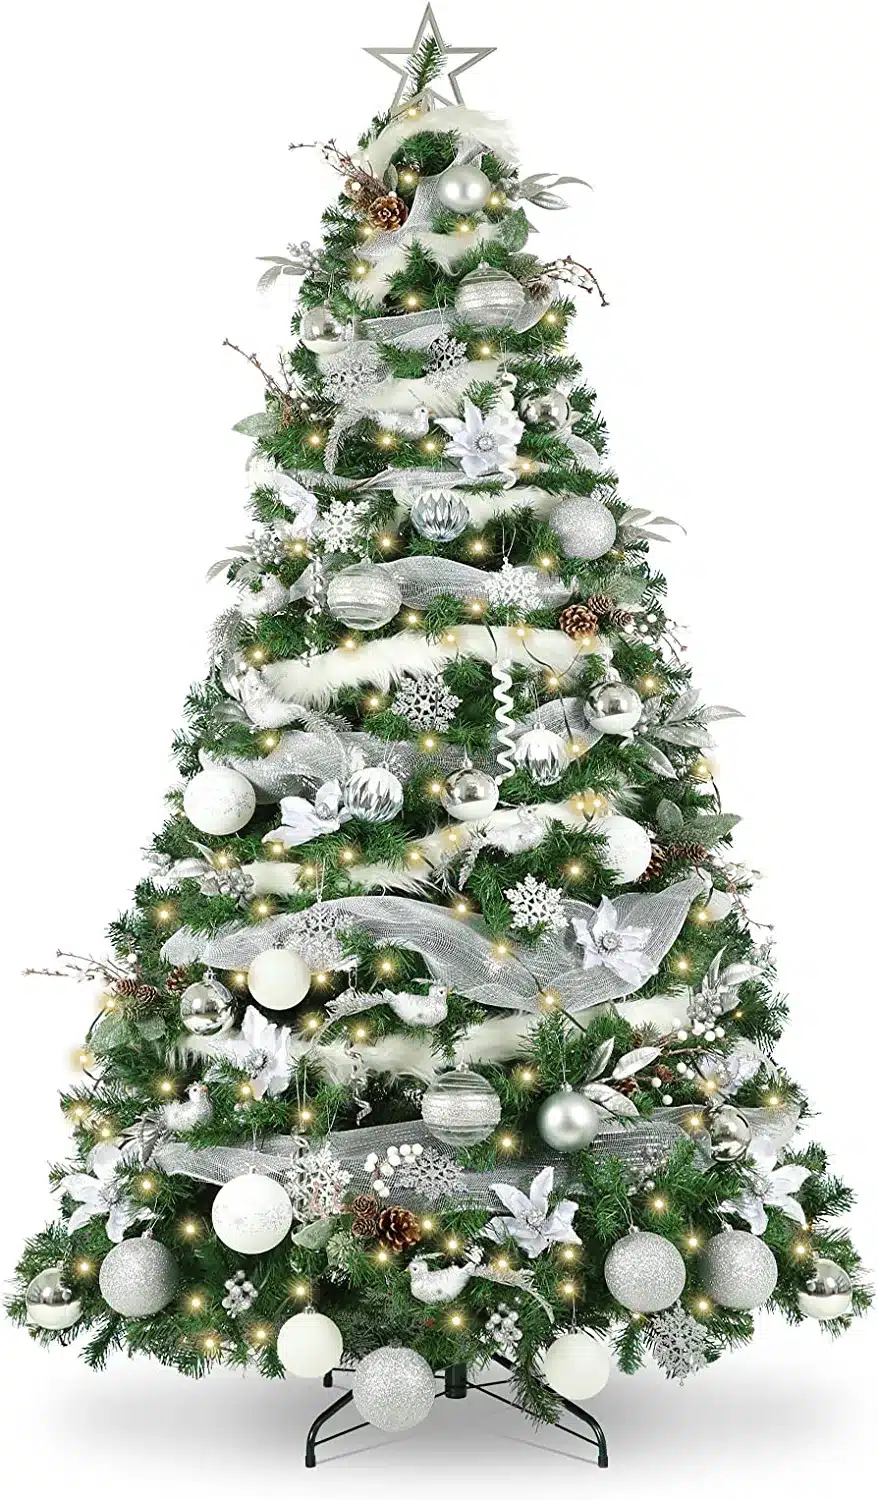 WBHome 5FT Decorated Artificial Christmas Tree